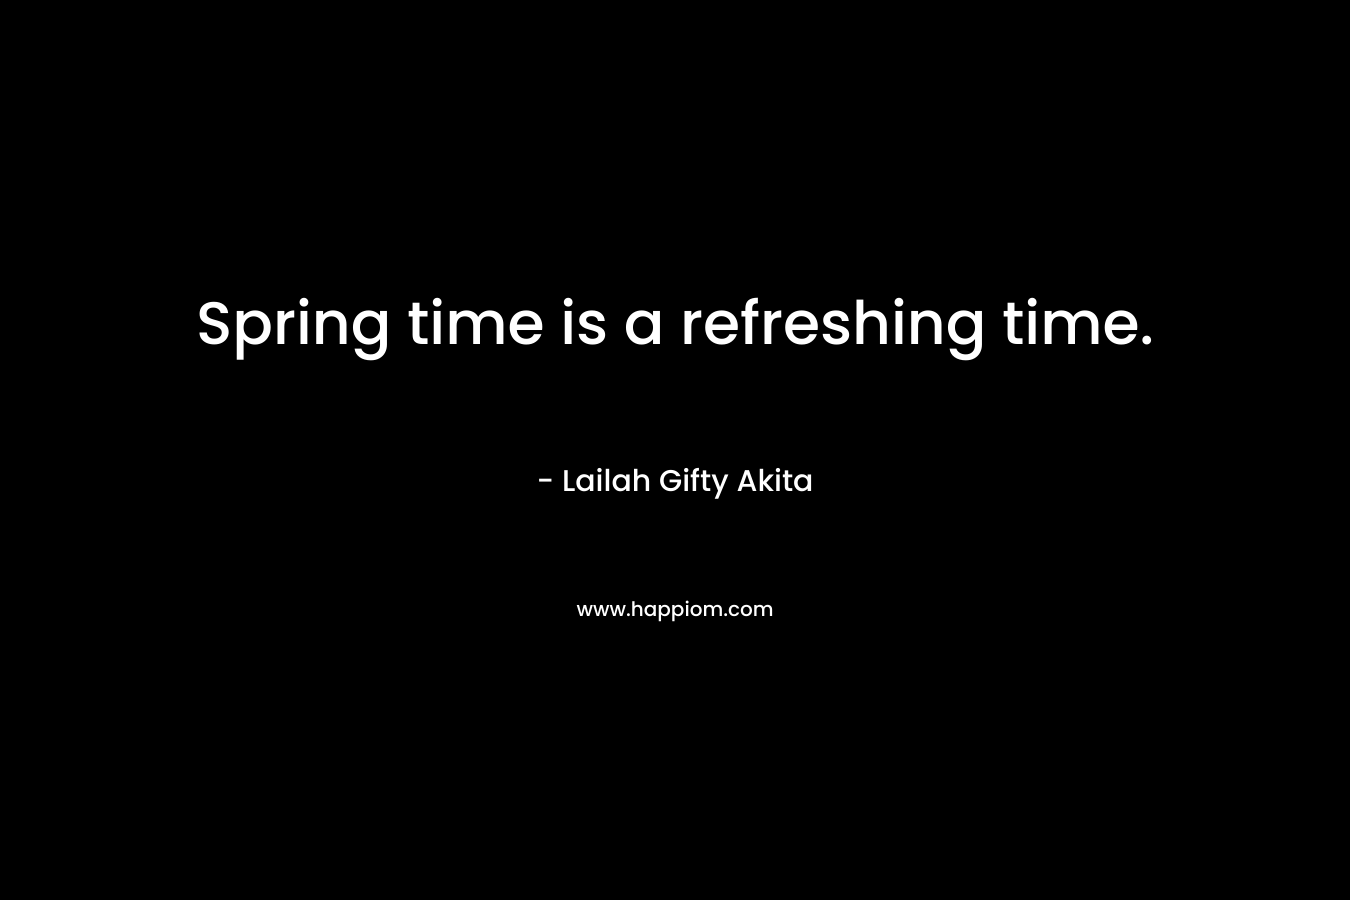 Spring time is a refreshing time. – Lailah Gifty Akita